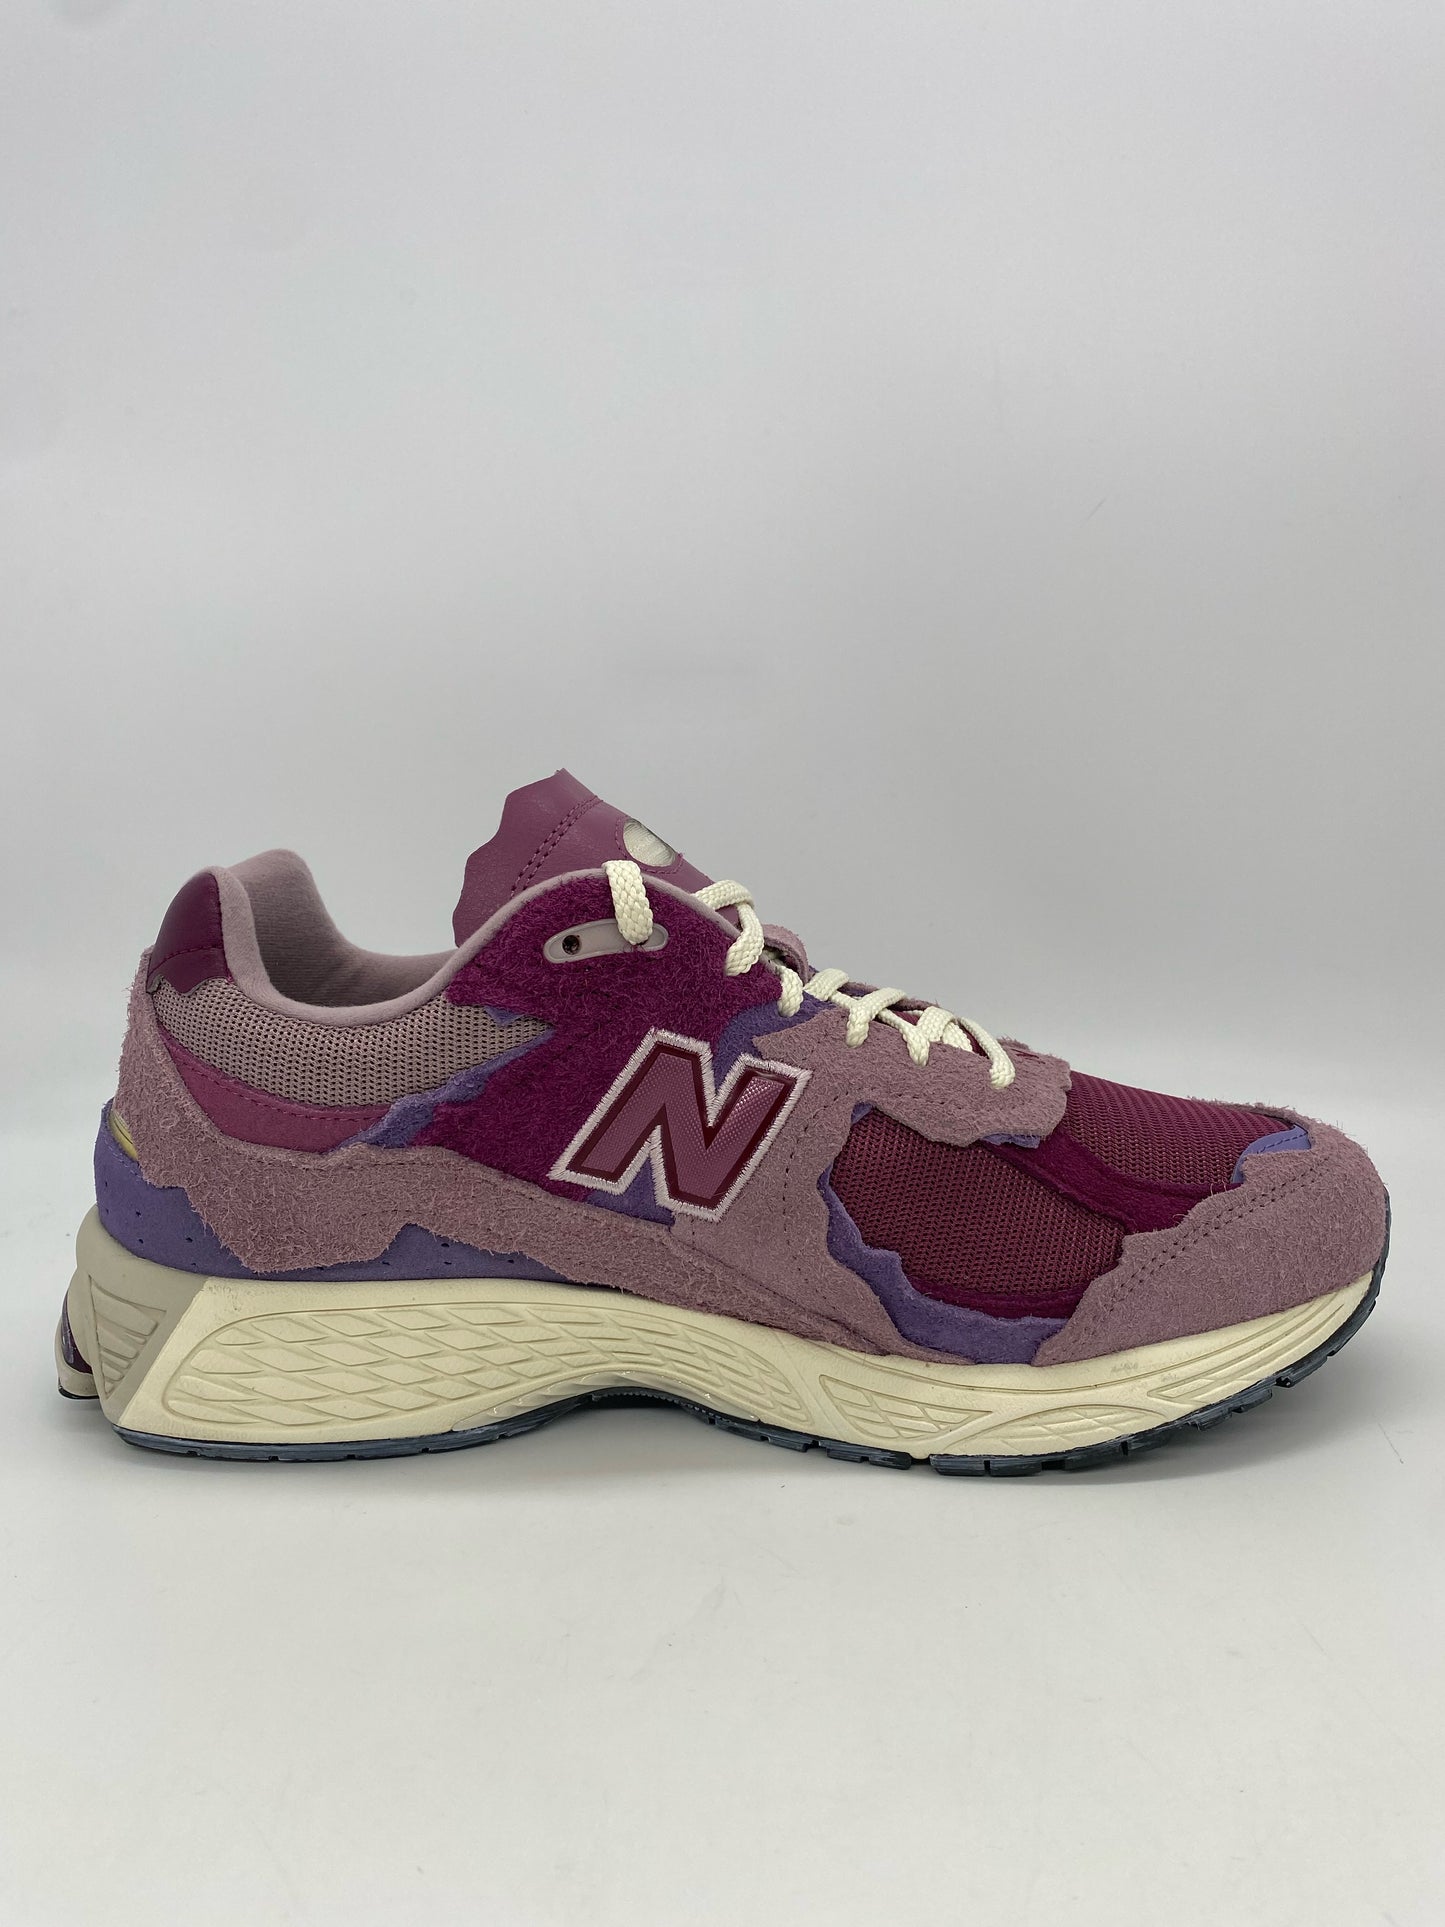 New Balance 2002R Protection Pack Pink